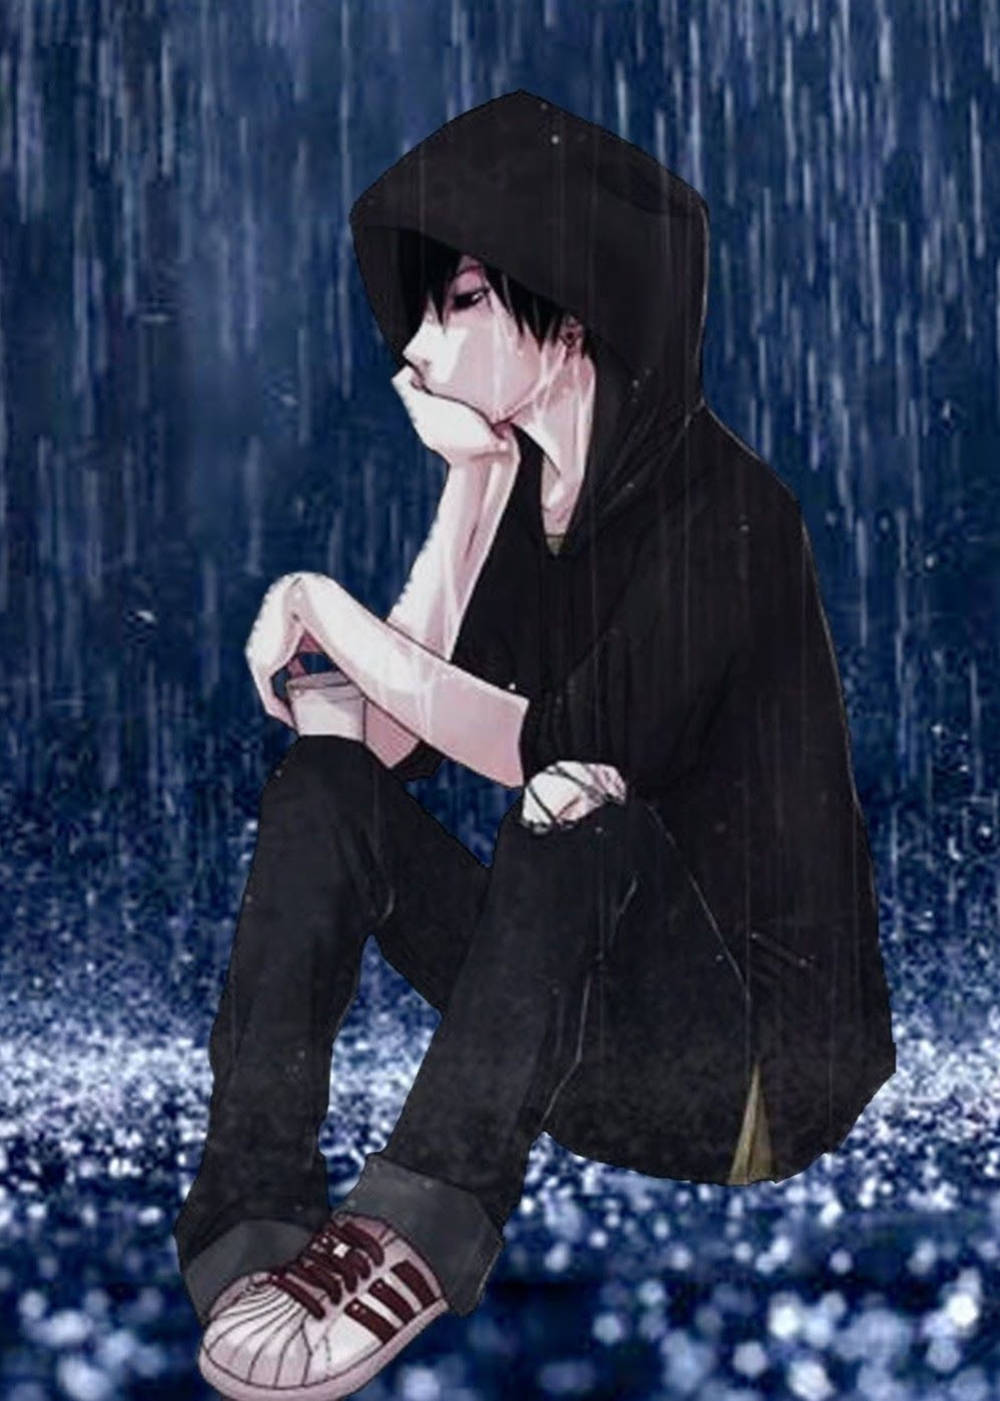 Download Sad Anime 4k Boy Crying With His Hood Up Wallpaper | Wallpapers.com